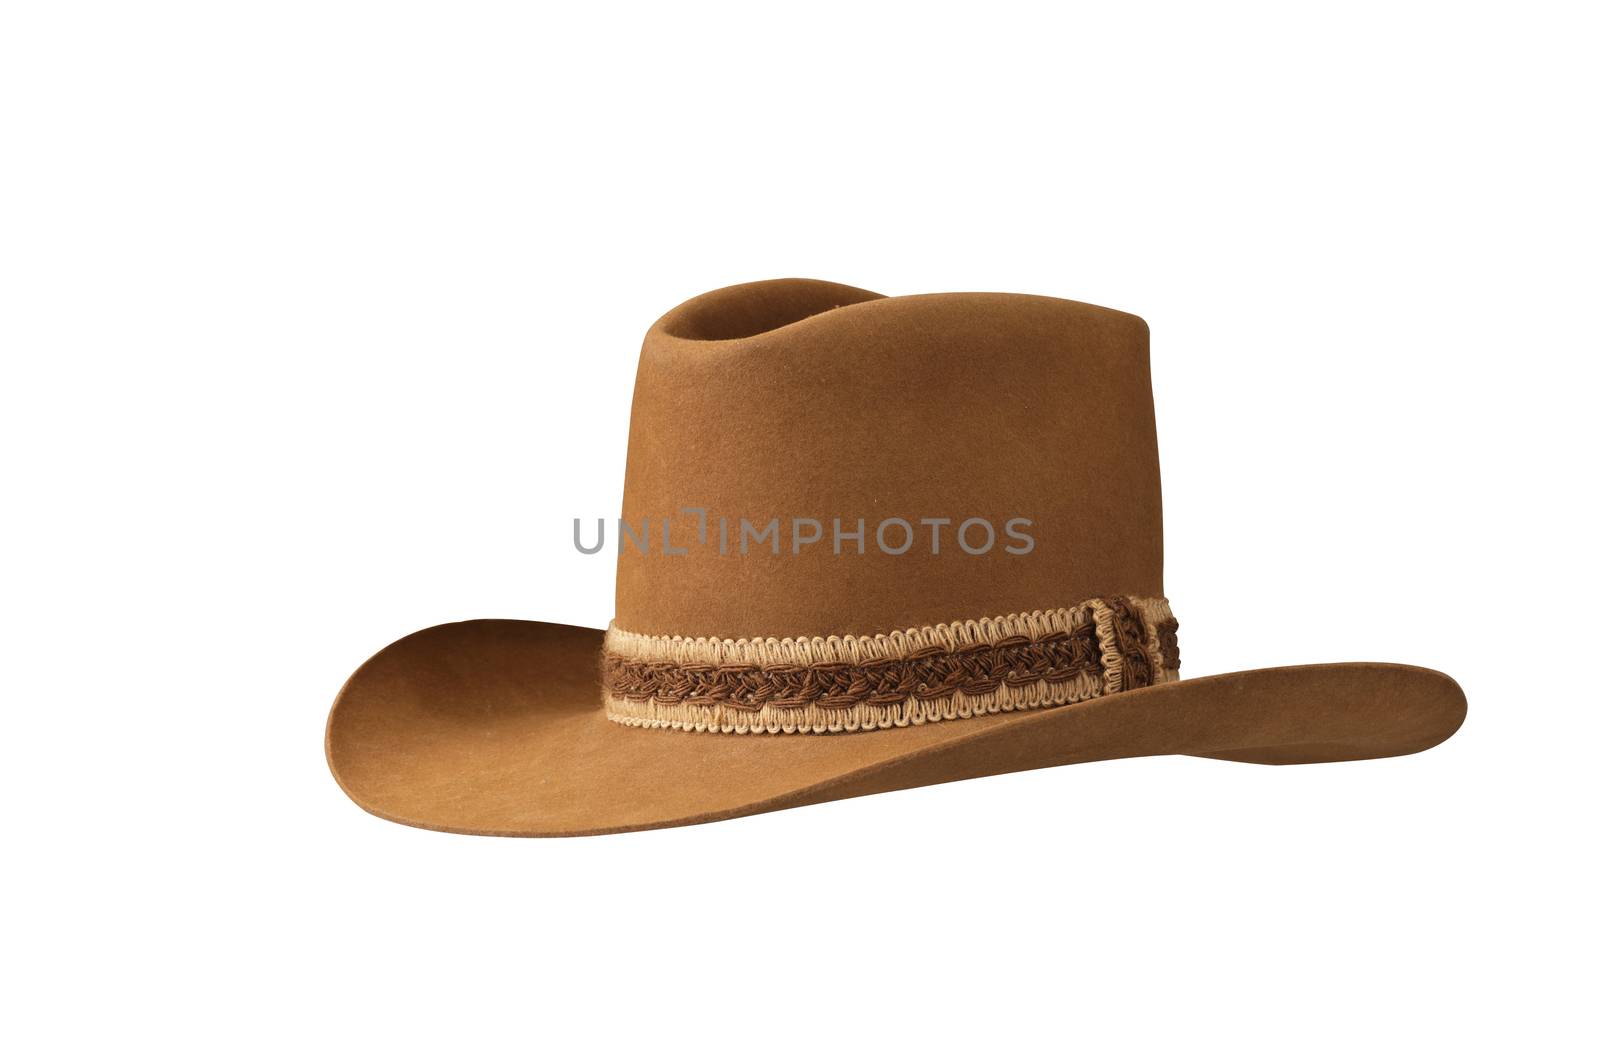 Traditional American cowboy hat by rcarner